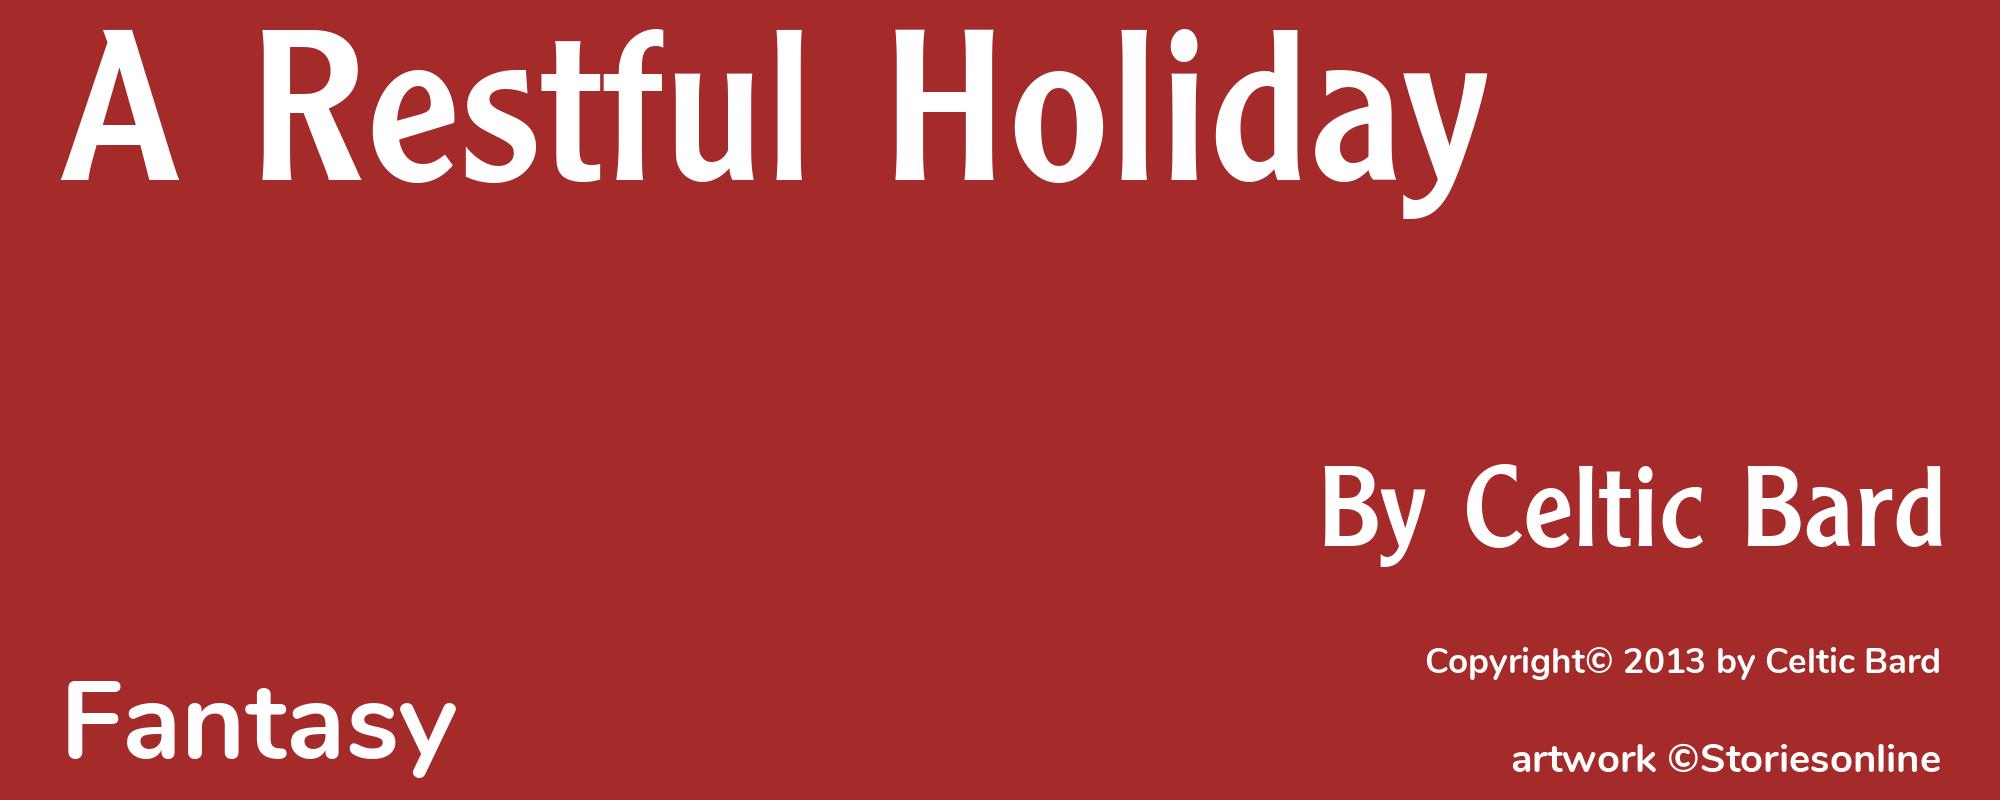 A Restful Holiday - Cover